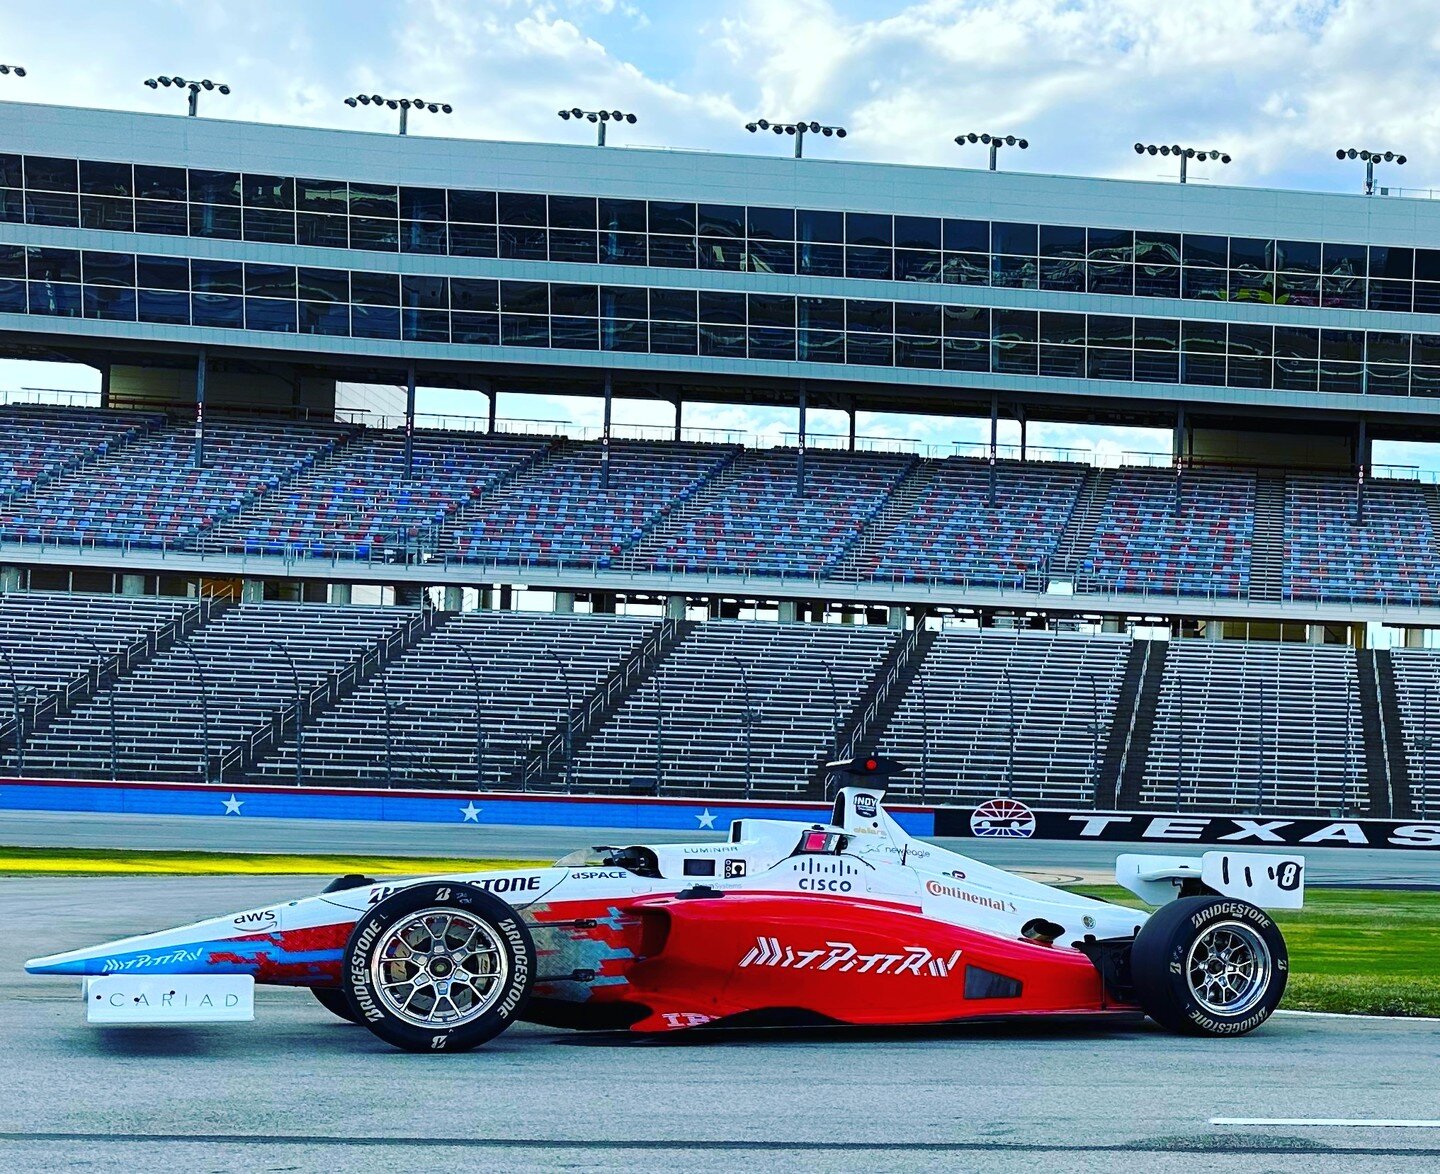 Isn't she pretty?! Check out the new livery on our car affectionally known as Betty!

We are now in the single digits until the @indyachallenge presented by @cisco on November 11th at @txmotorspeedway! Just 9 more days until &quot;Betty&quot; hits th